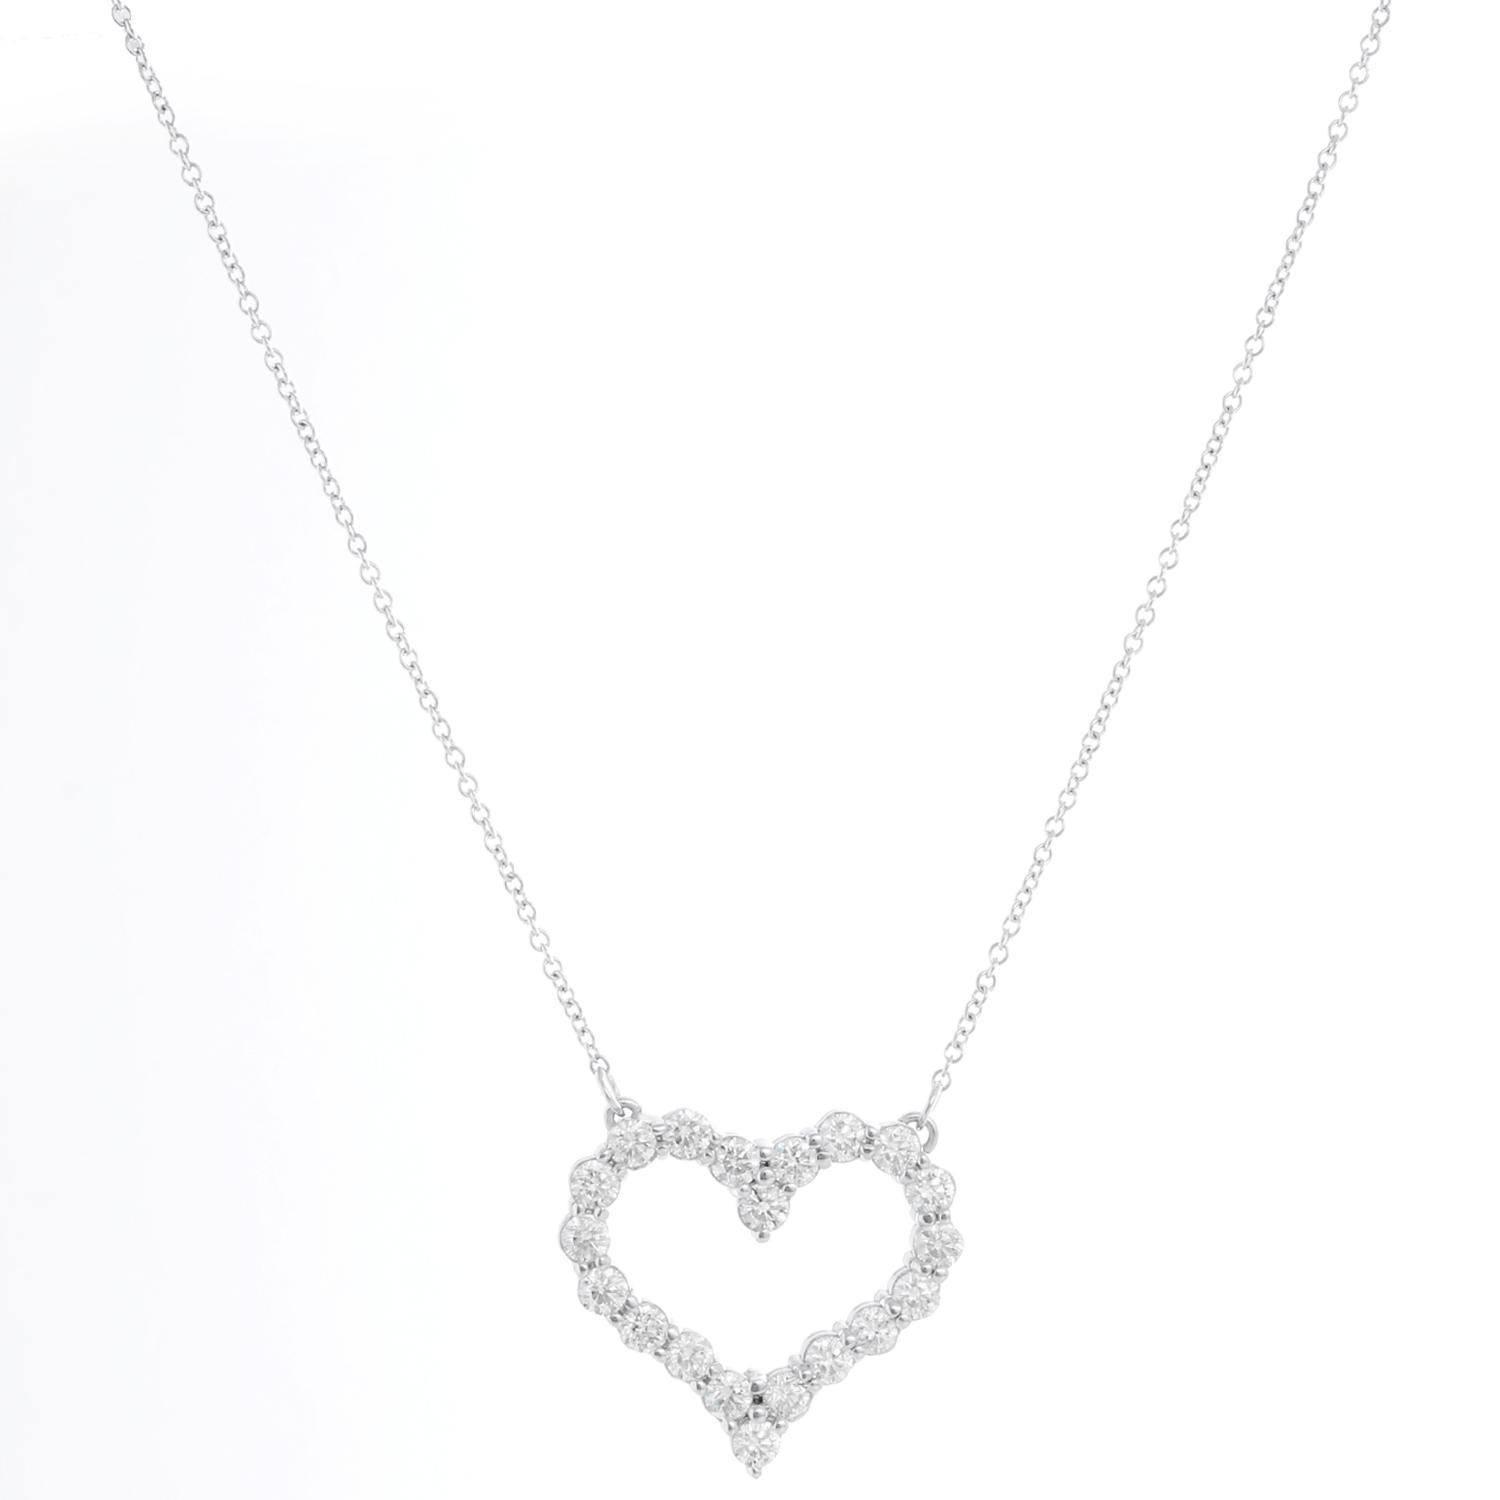 18K White Gold Diamond Heart Necklace 3.21 cts - Beautiful heart pendant with 20 round brilliant diamonds set in 18K white gold.  Weighing 3.21 cts. Clarity VS/SI1. Color H . Length 22 inches with 2